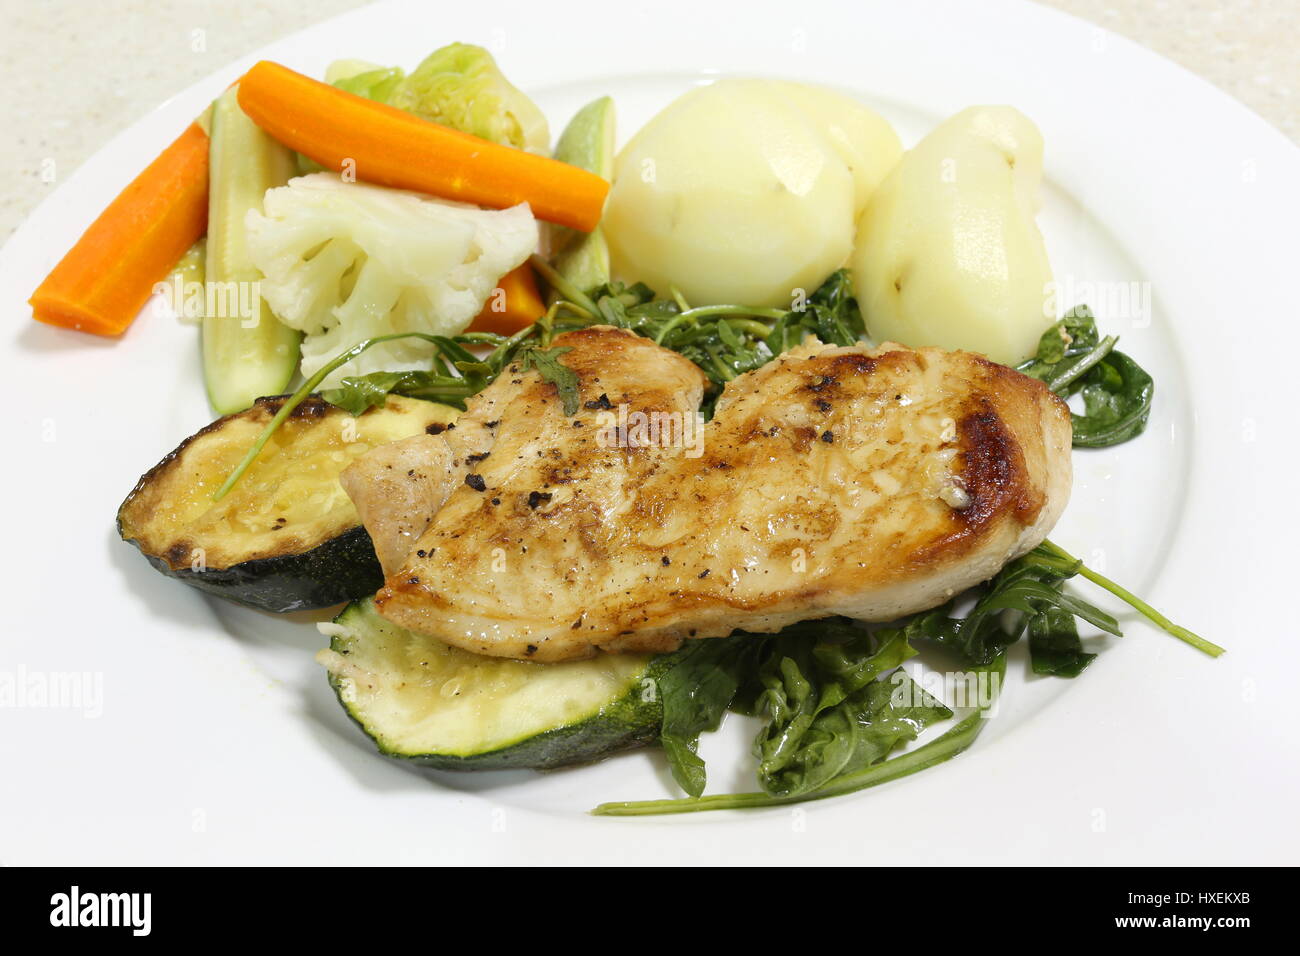 Grilled chicken on a bed of boiled rocket or aragula, served with potatoes and a mixture of steamed vegetables Stock Photo